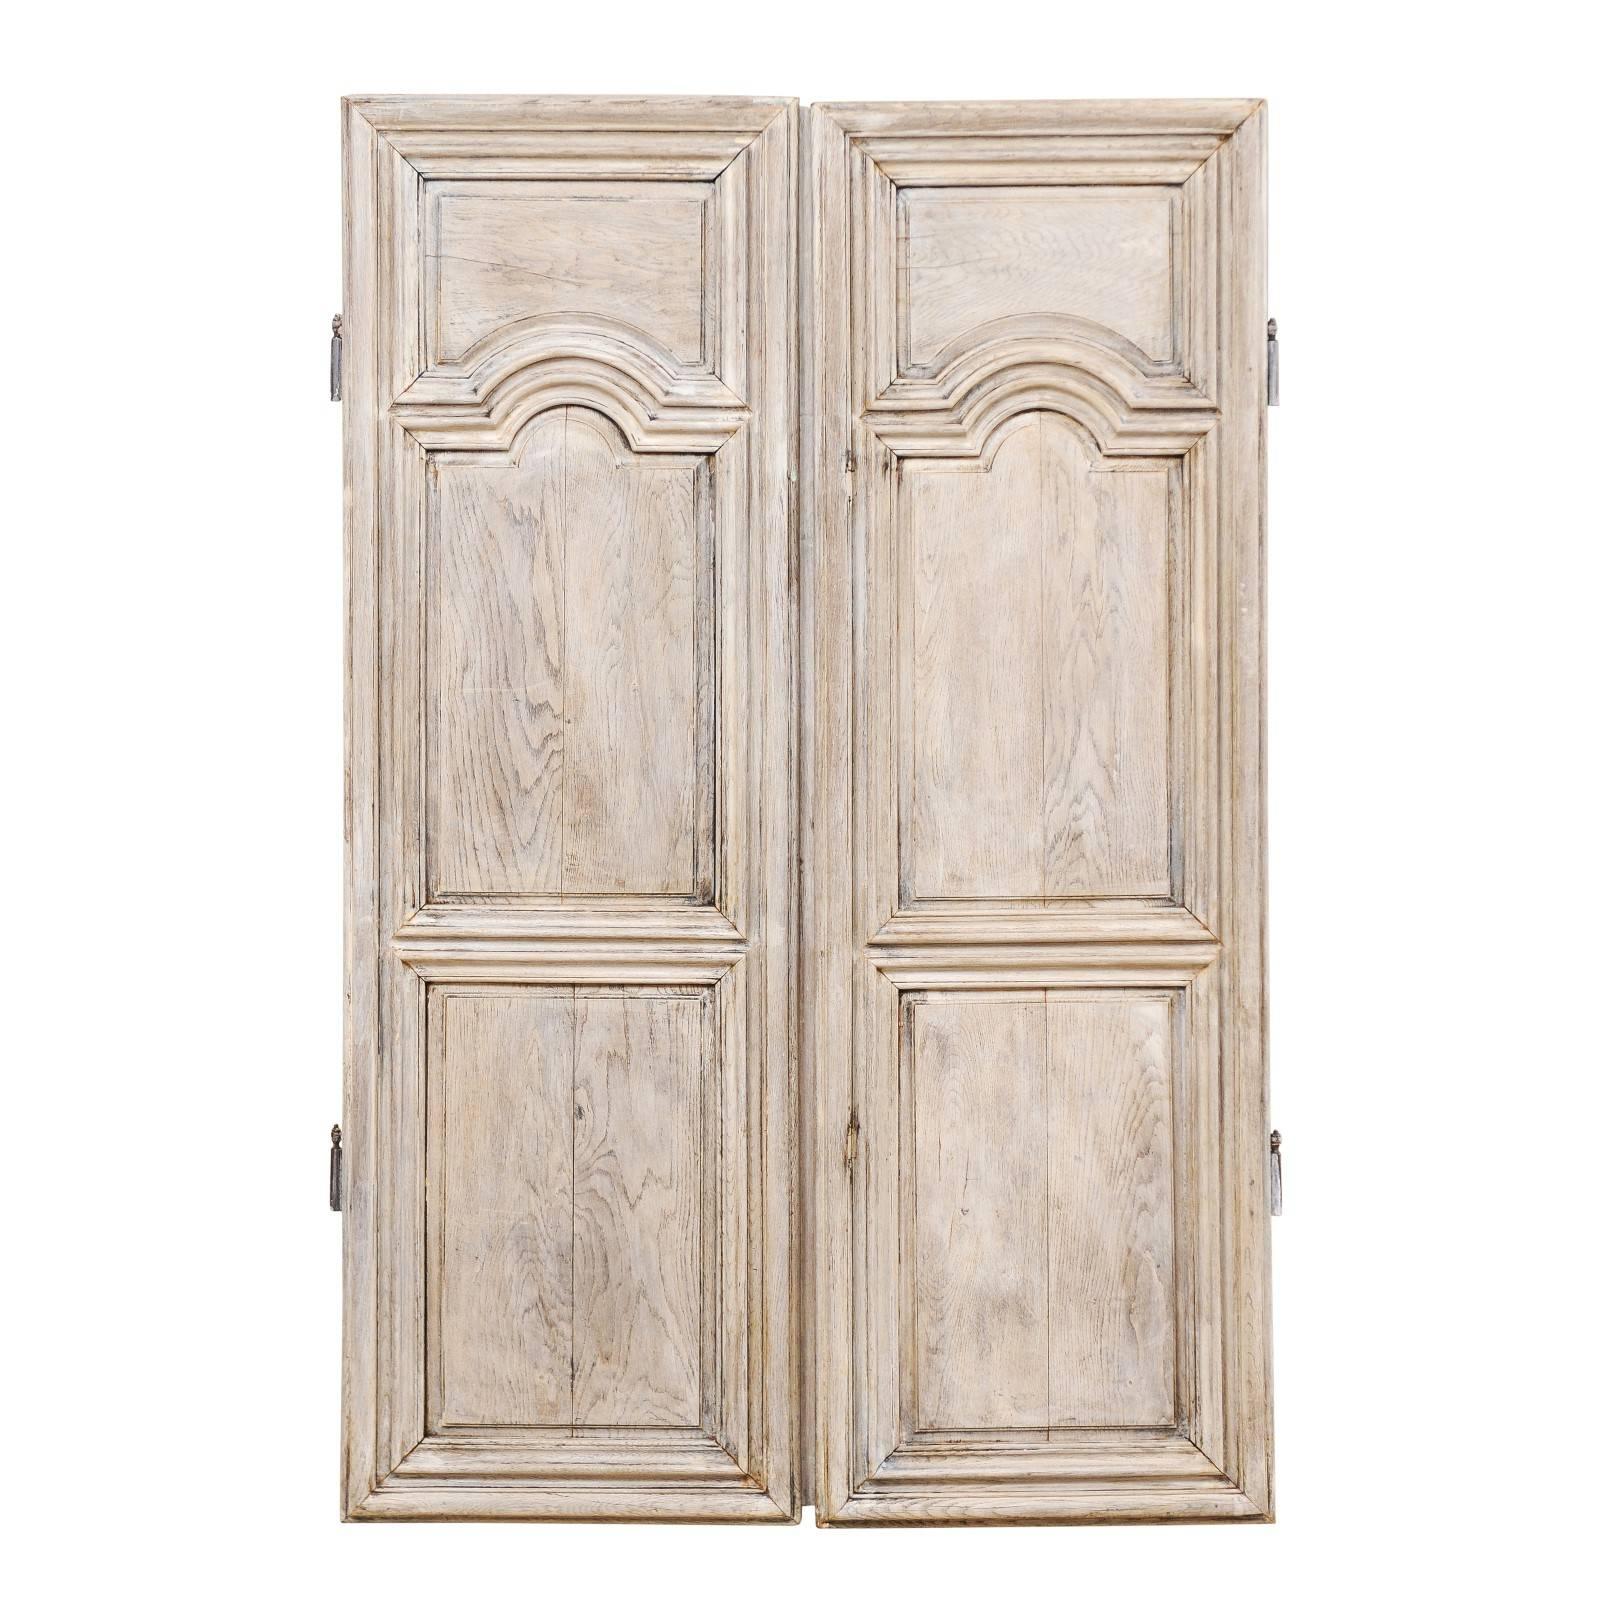 Pair of Lovely 19th Century French Doors with a Painted Pale Grey Wash